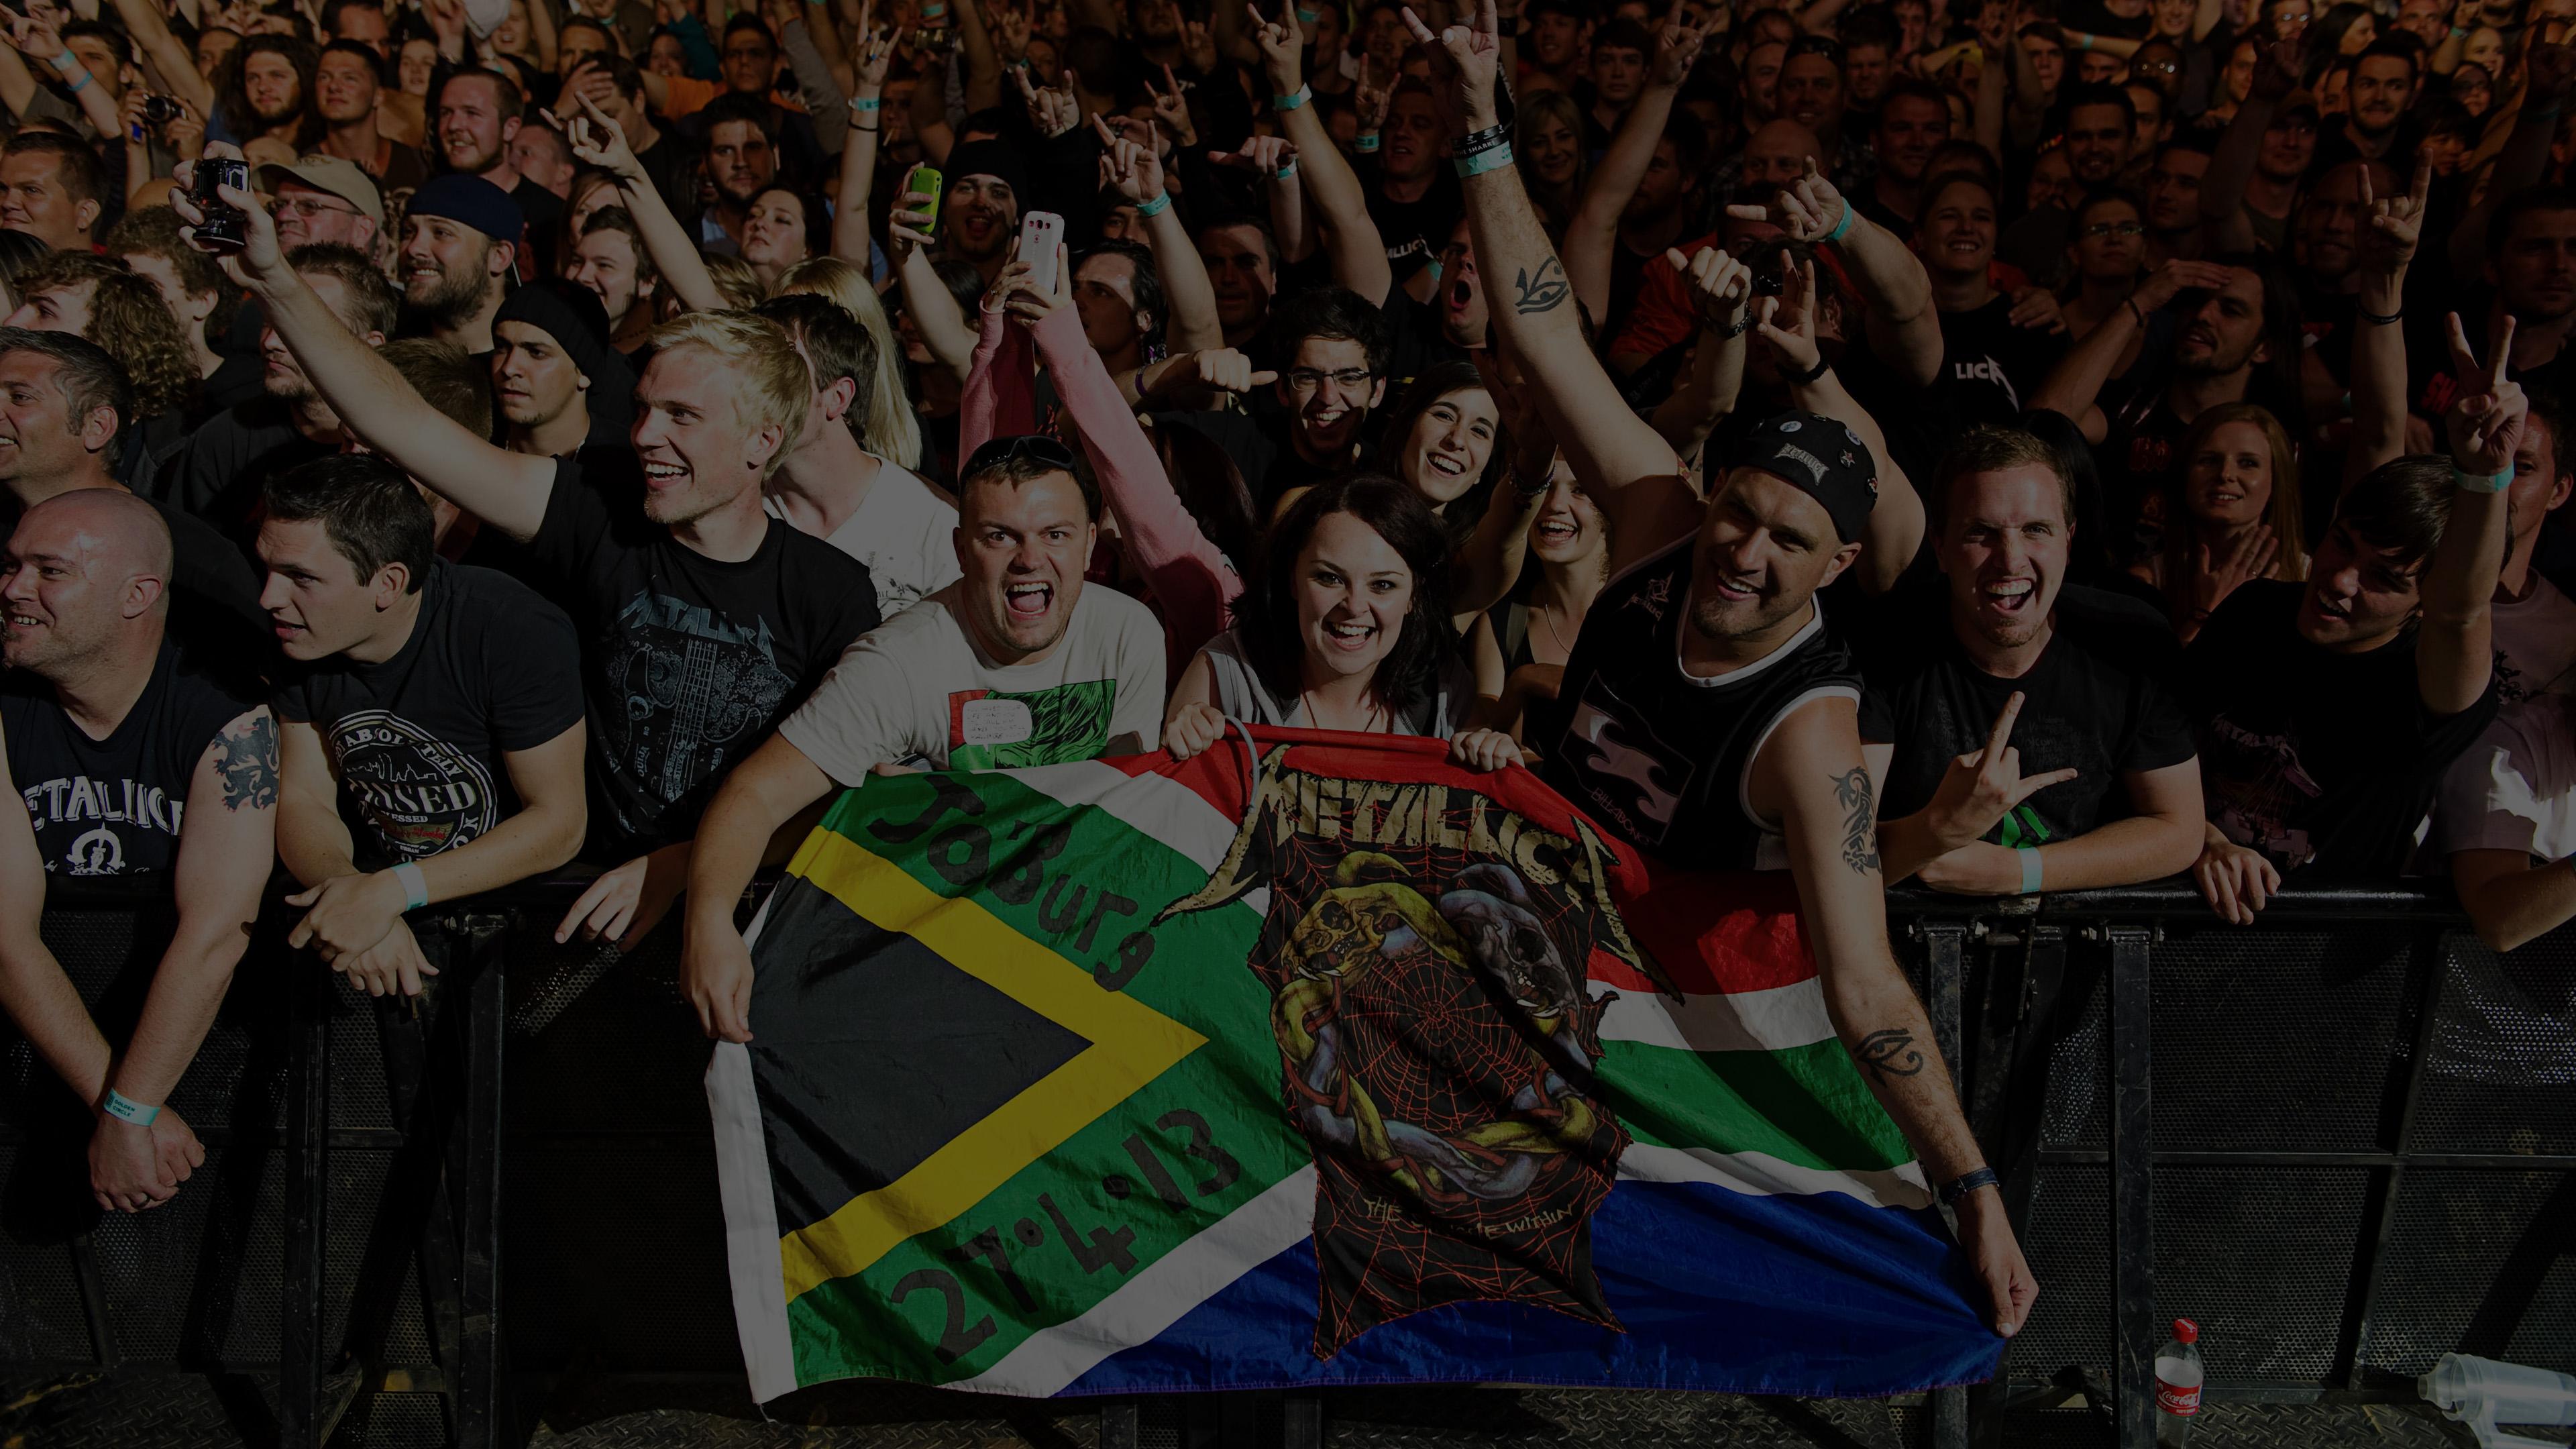 Banner Image for the photo gallery from the gig in Johannesburg, South Africa shot on April 27, 2013